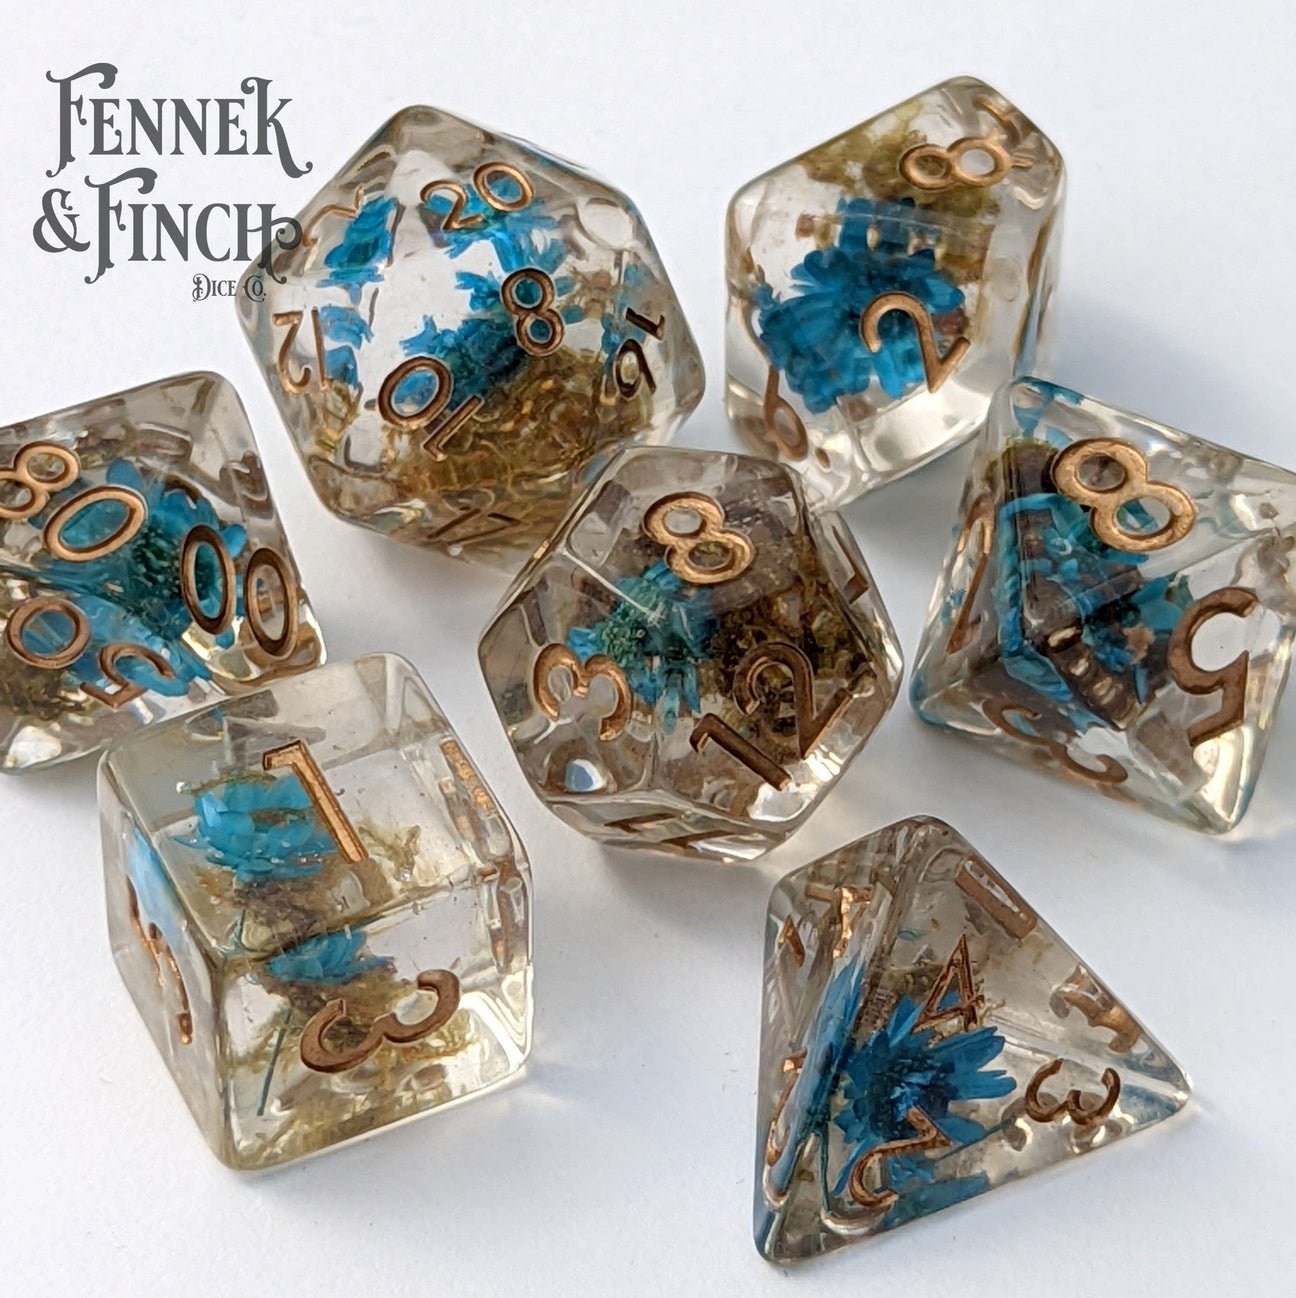 Tiny Blue Flowers and Moss (terrarium style) - 7 piece dice set - The Fourth Place